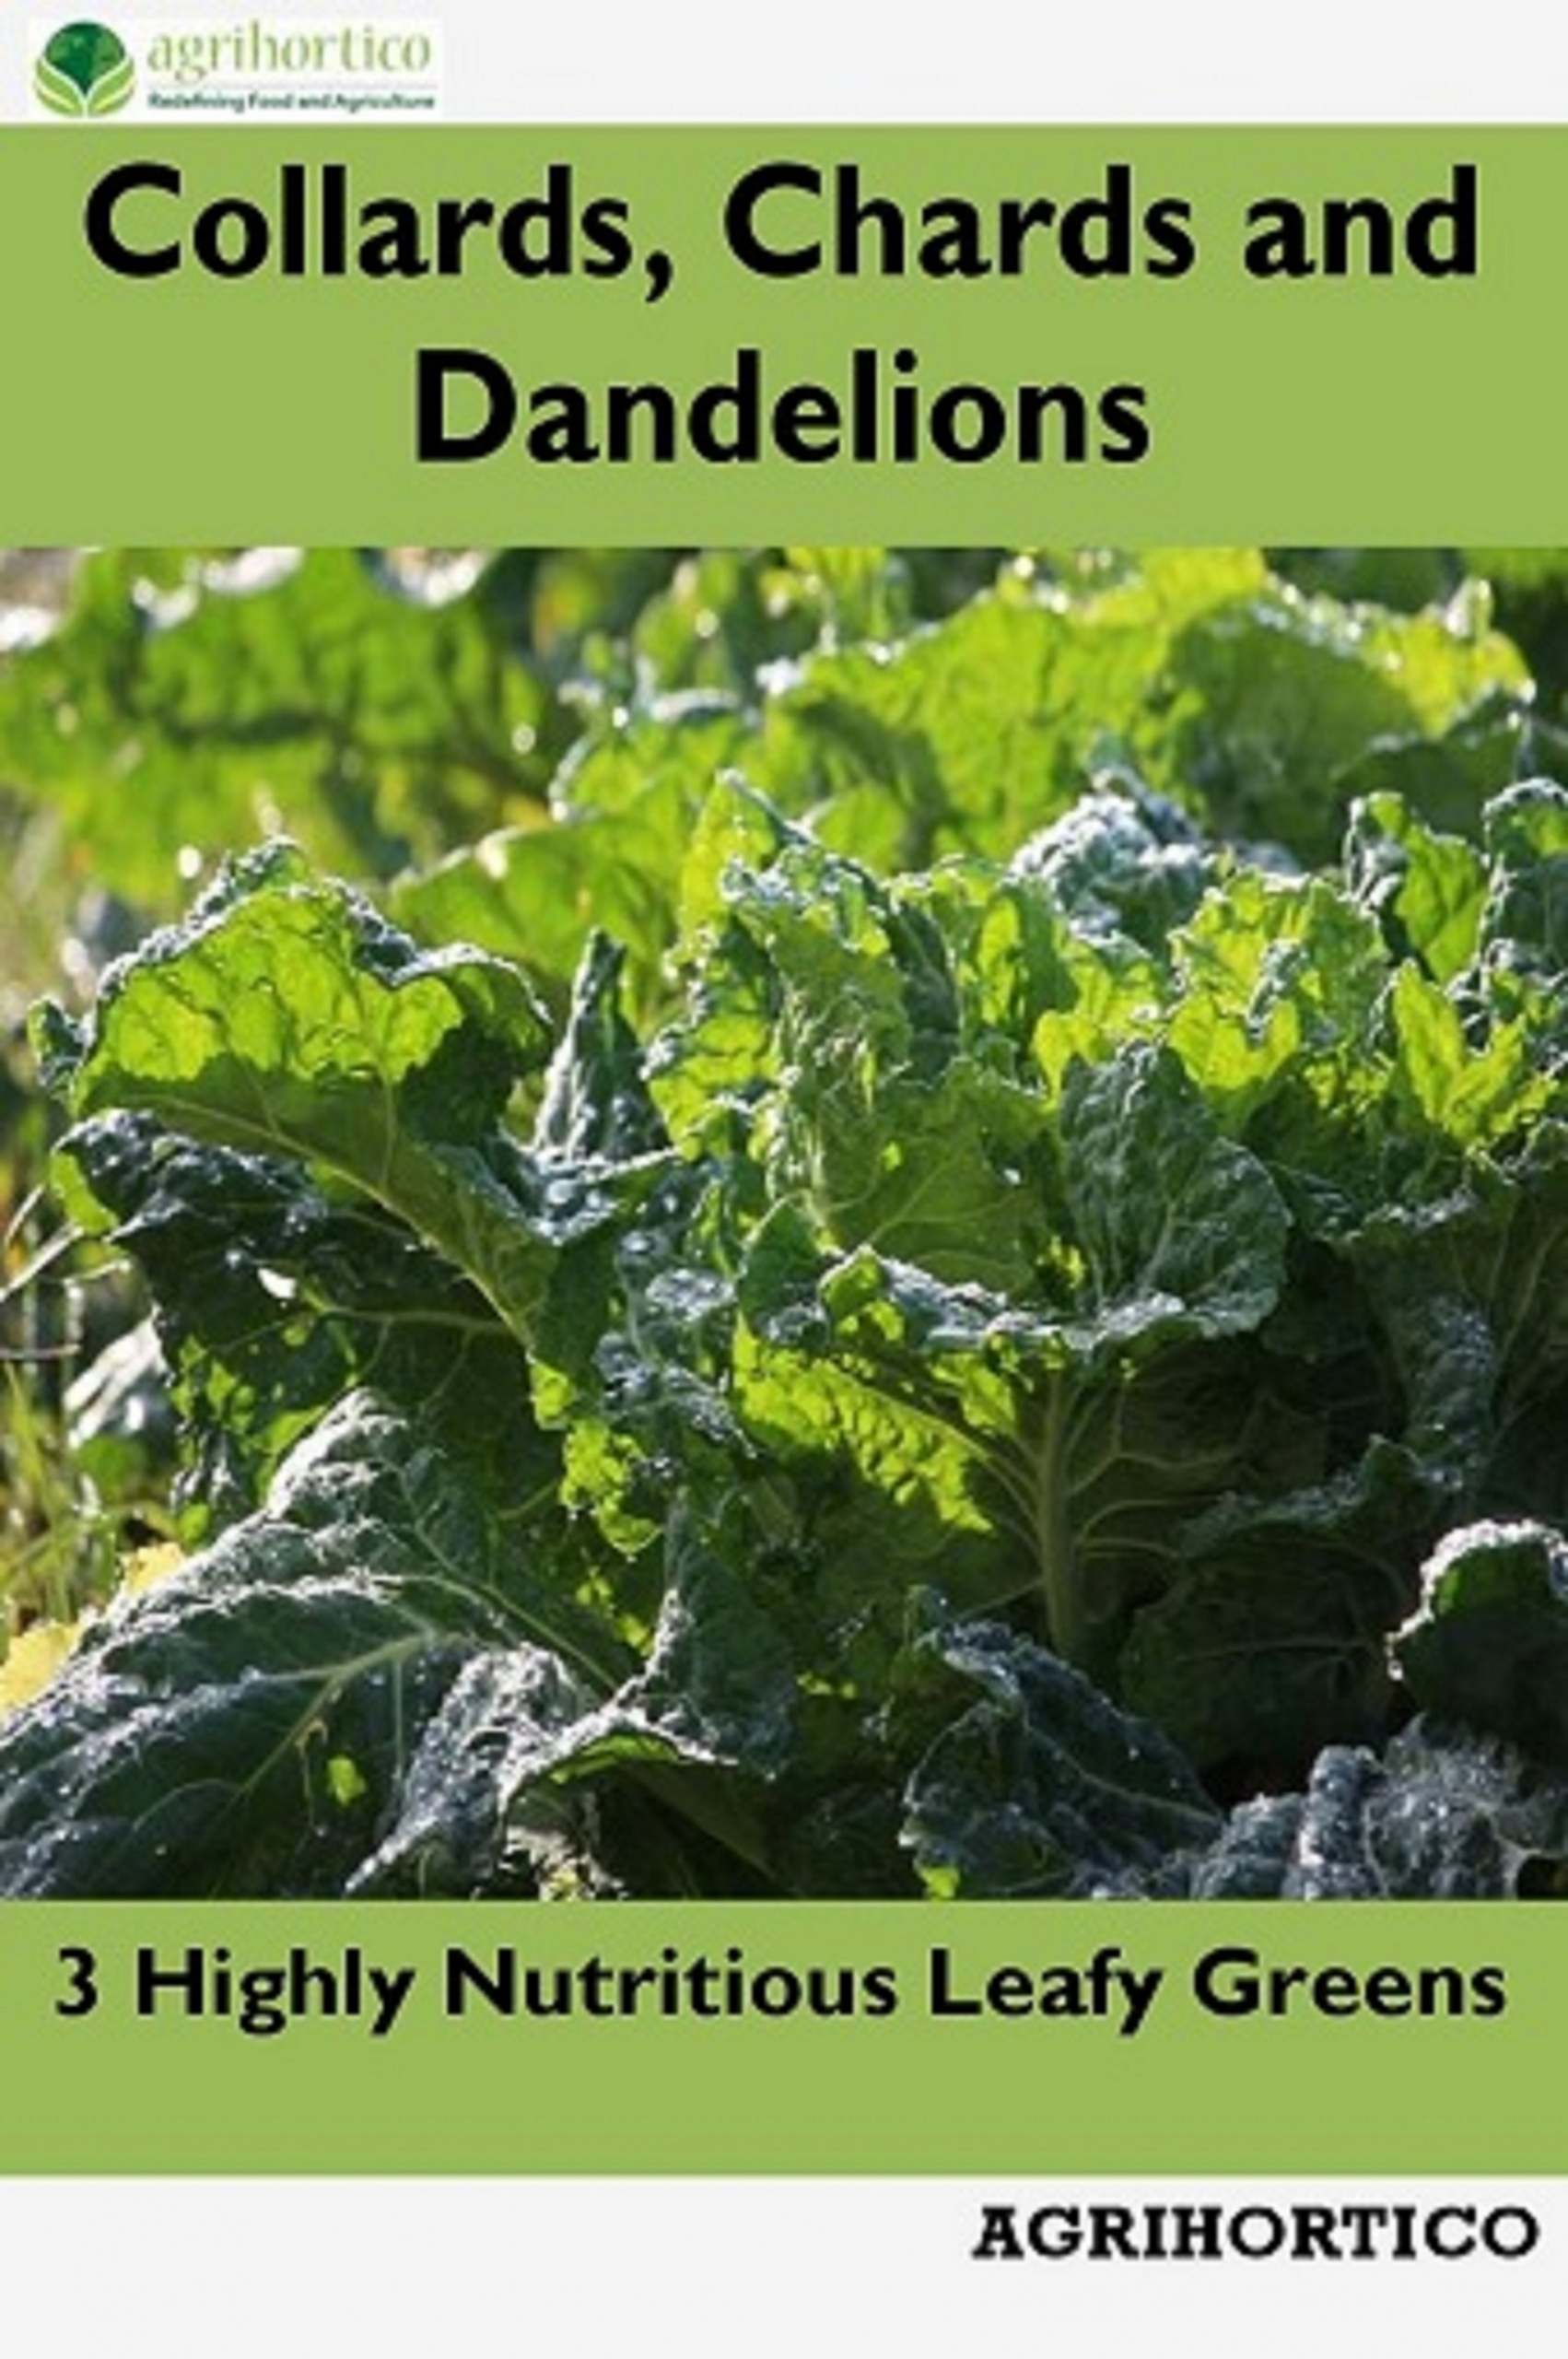 Collards, Chards and Dandelions